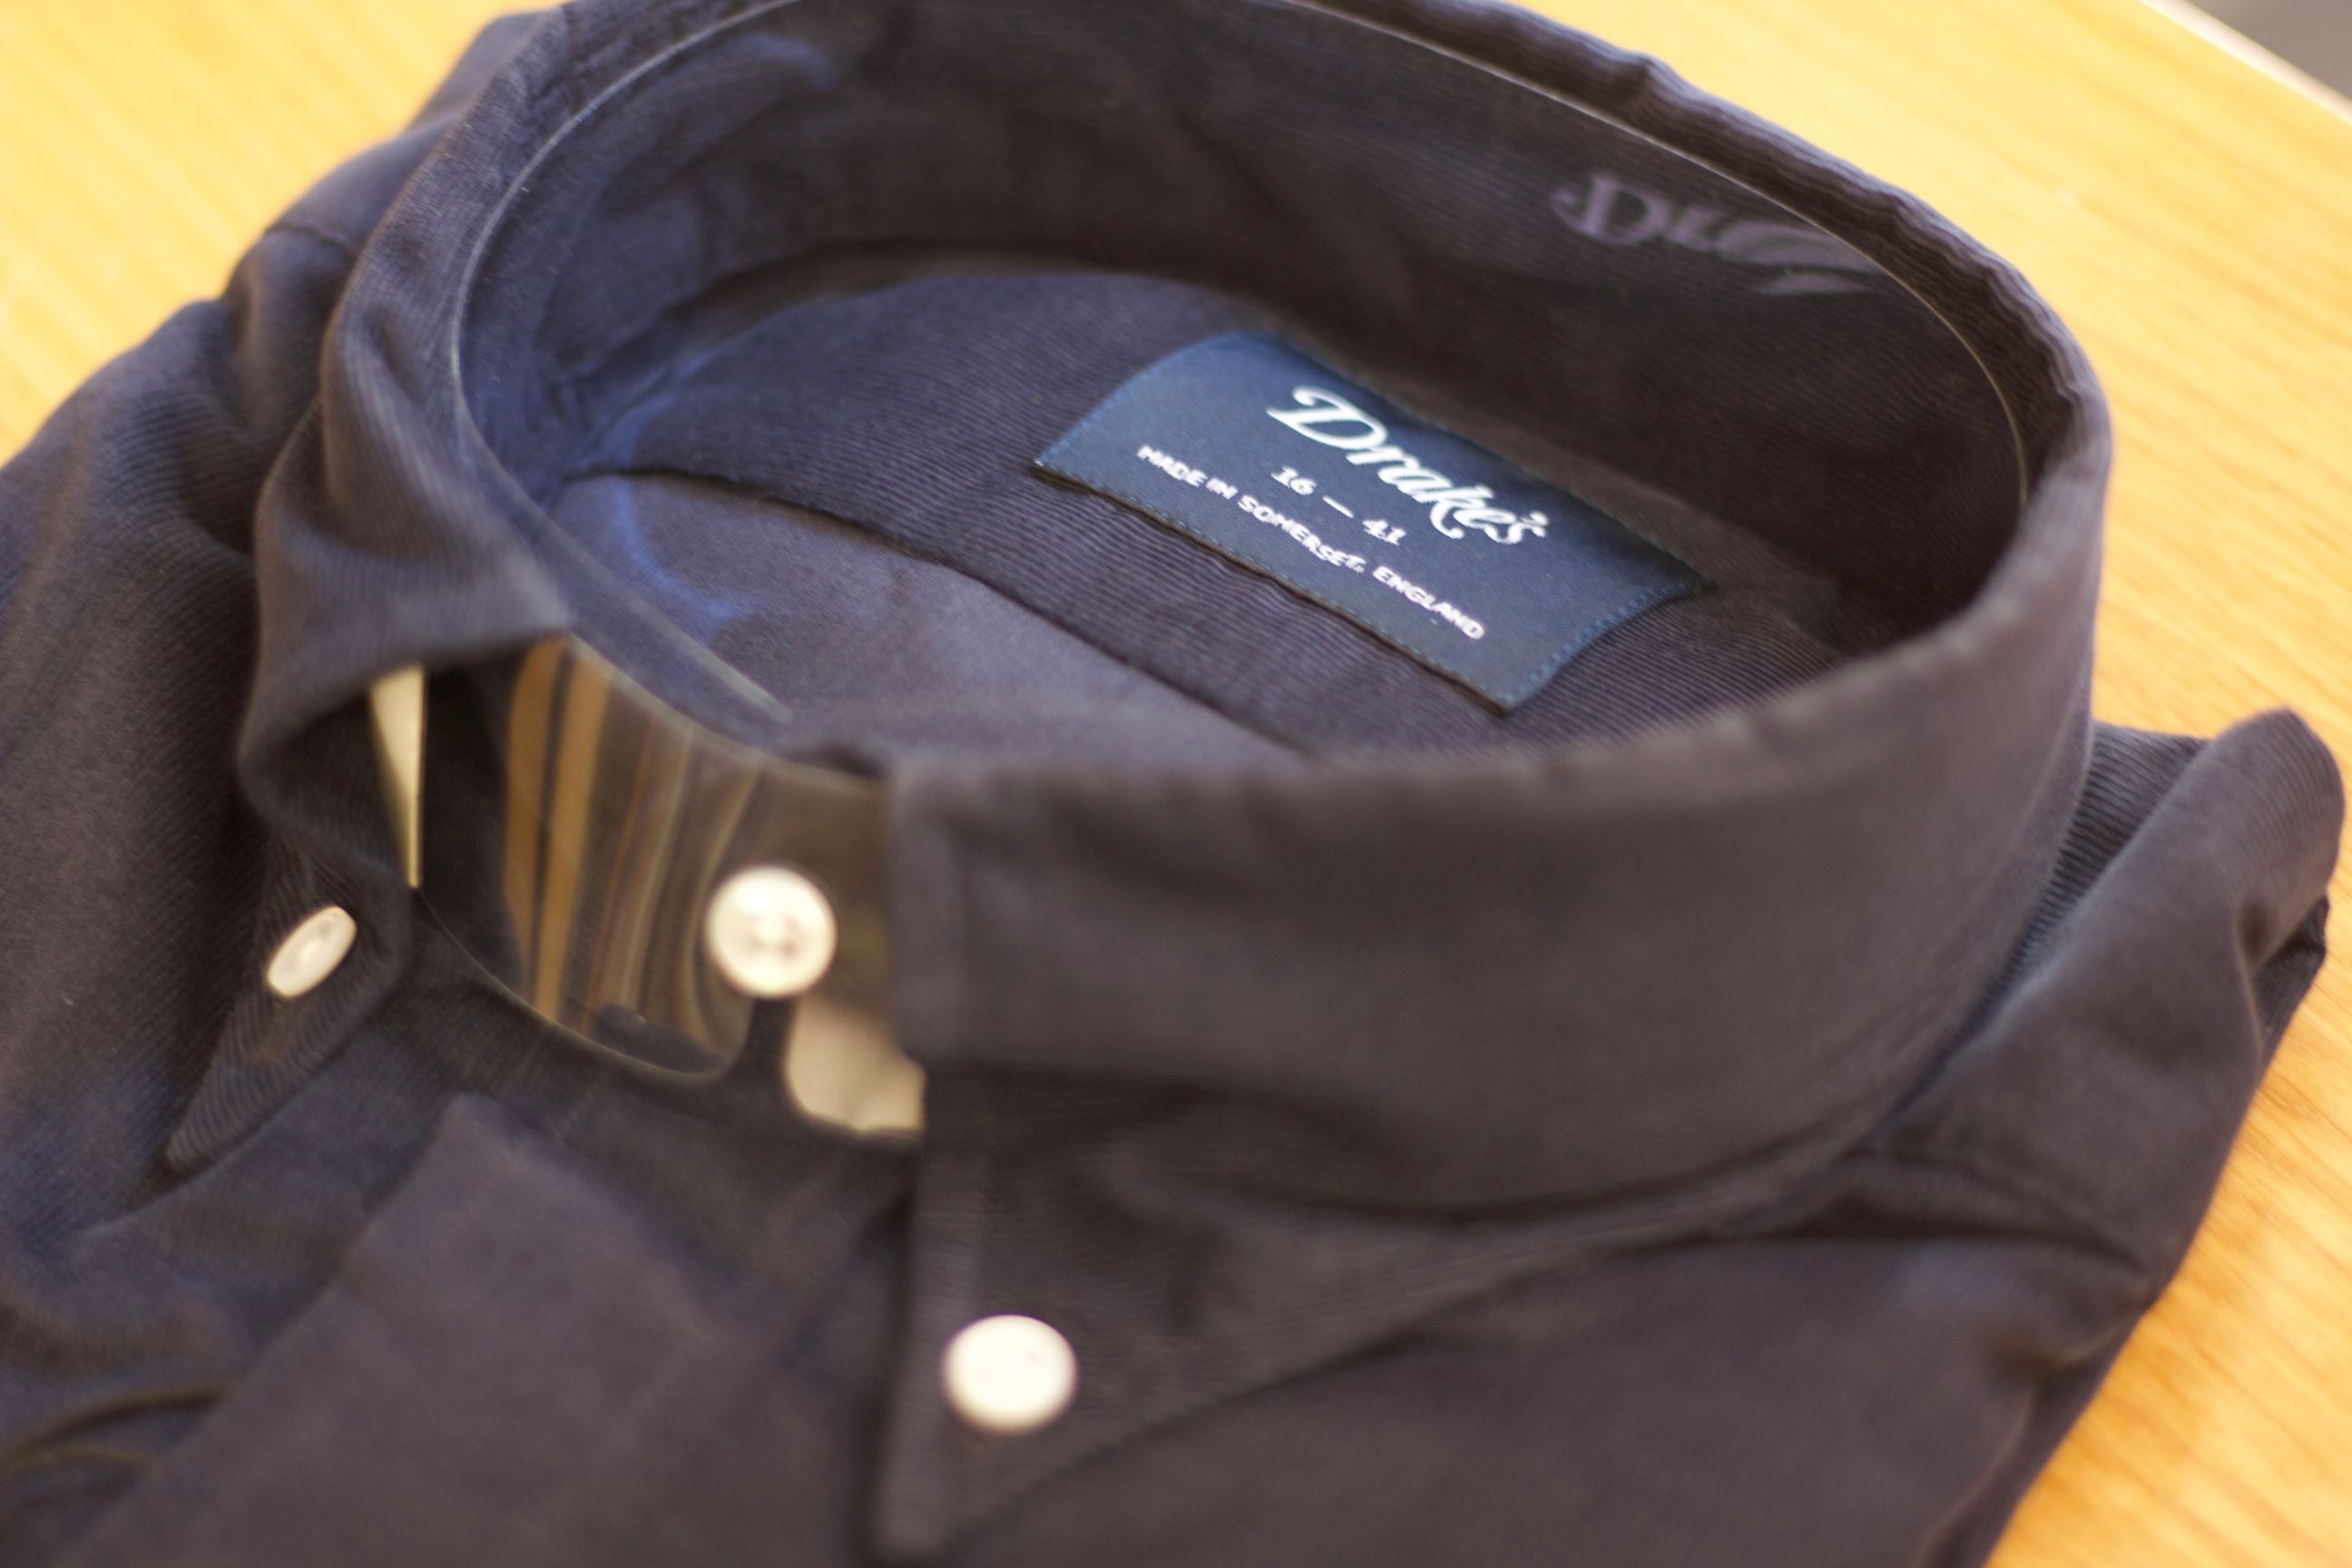 100% Cotton Made in Our Factory in Somerset, England Button-Down Collar with Brushed, Floating Interlining Box Pleat Single Rounded One-Button Cuff Point Breast Pocket with Pen Holder Whipped 18L Mother of Pearl Buttons